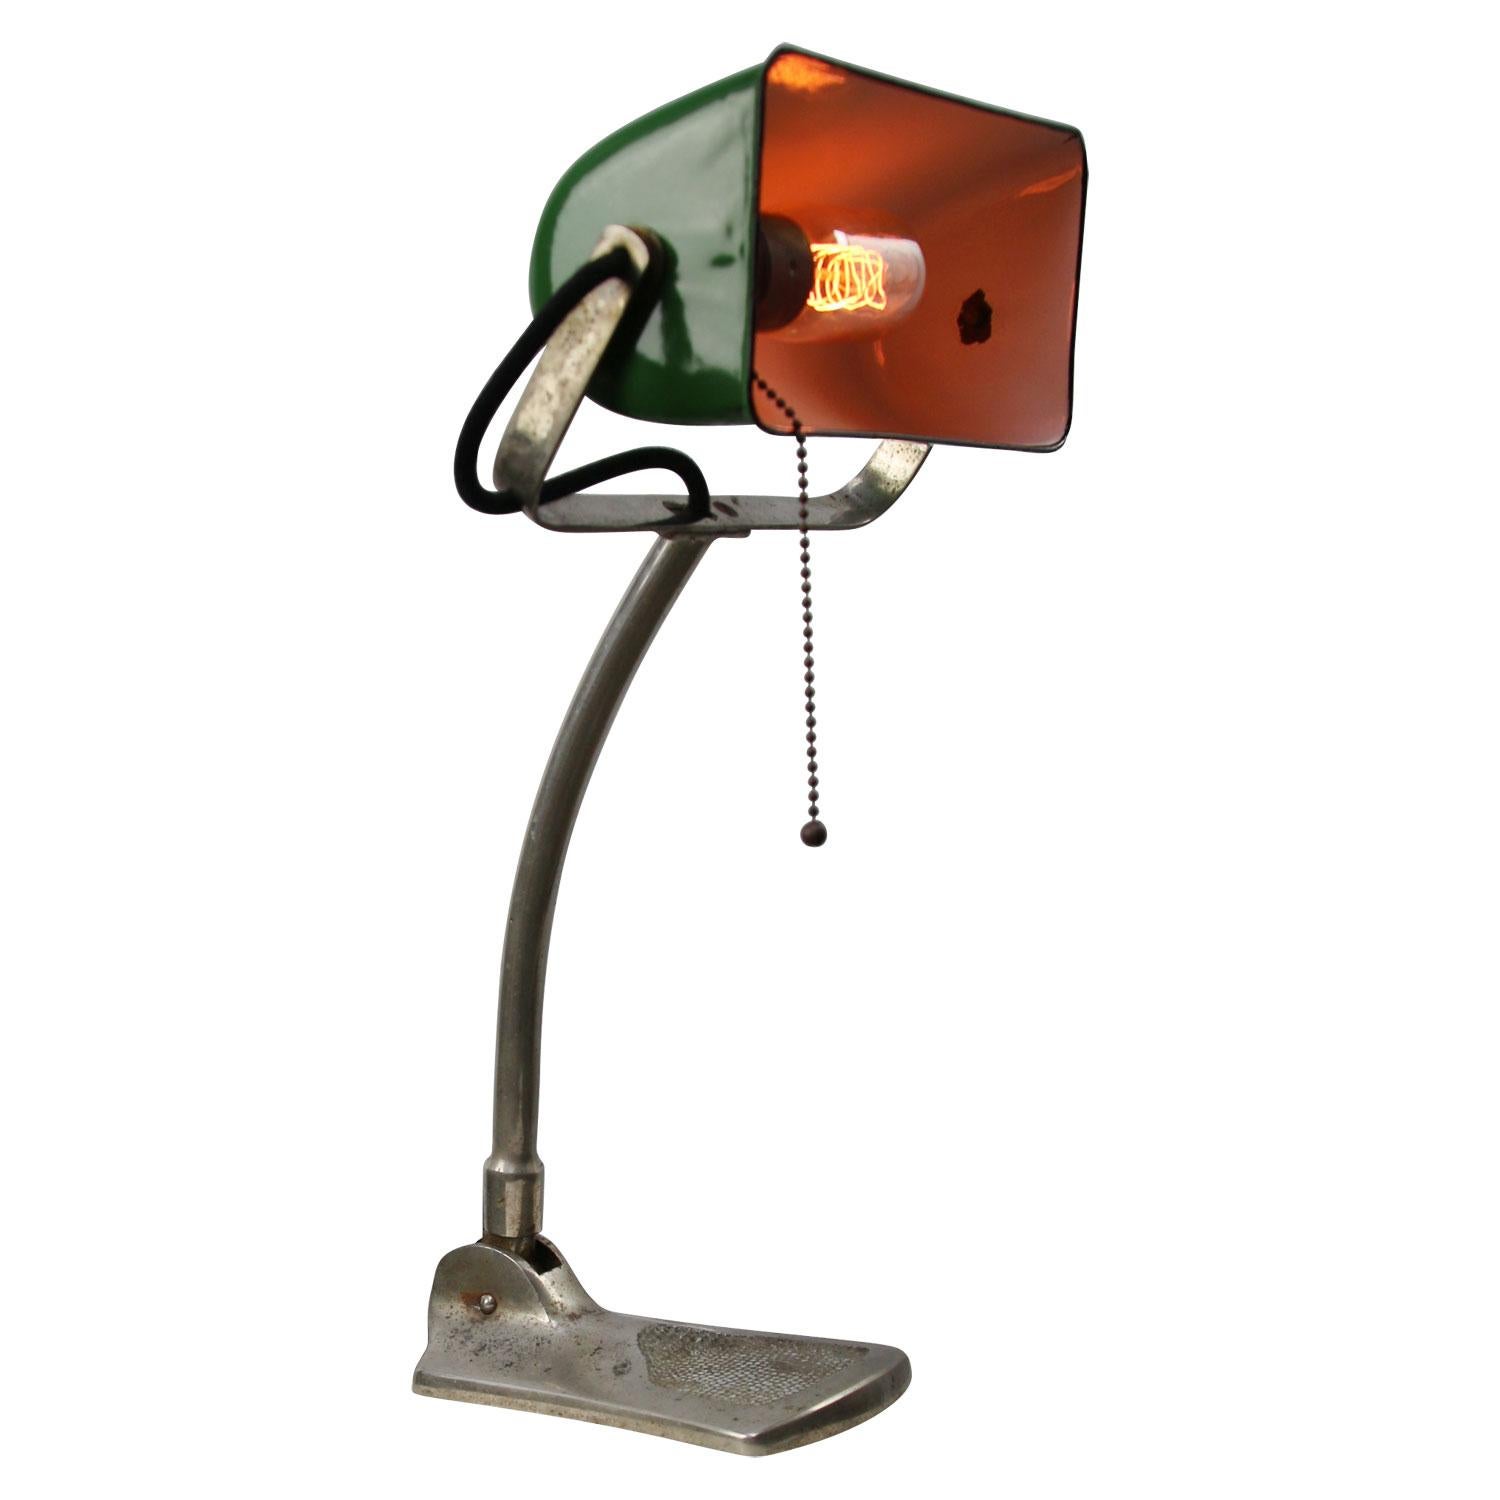 Green enamel desk light
2.5 meter black cotton flex, plug and pul switch

Also available with US/UK plug

Weight: 2.70 kg / 6 lb

Priced per individual item. All lamps have been made suitable by international standards for incandescent light